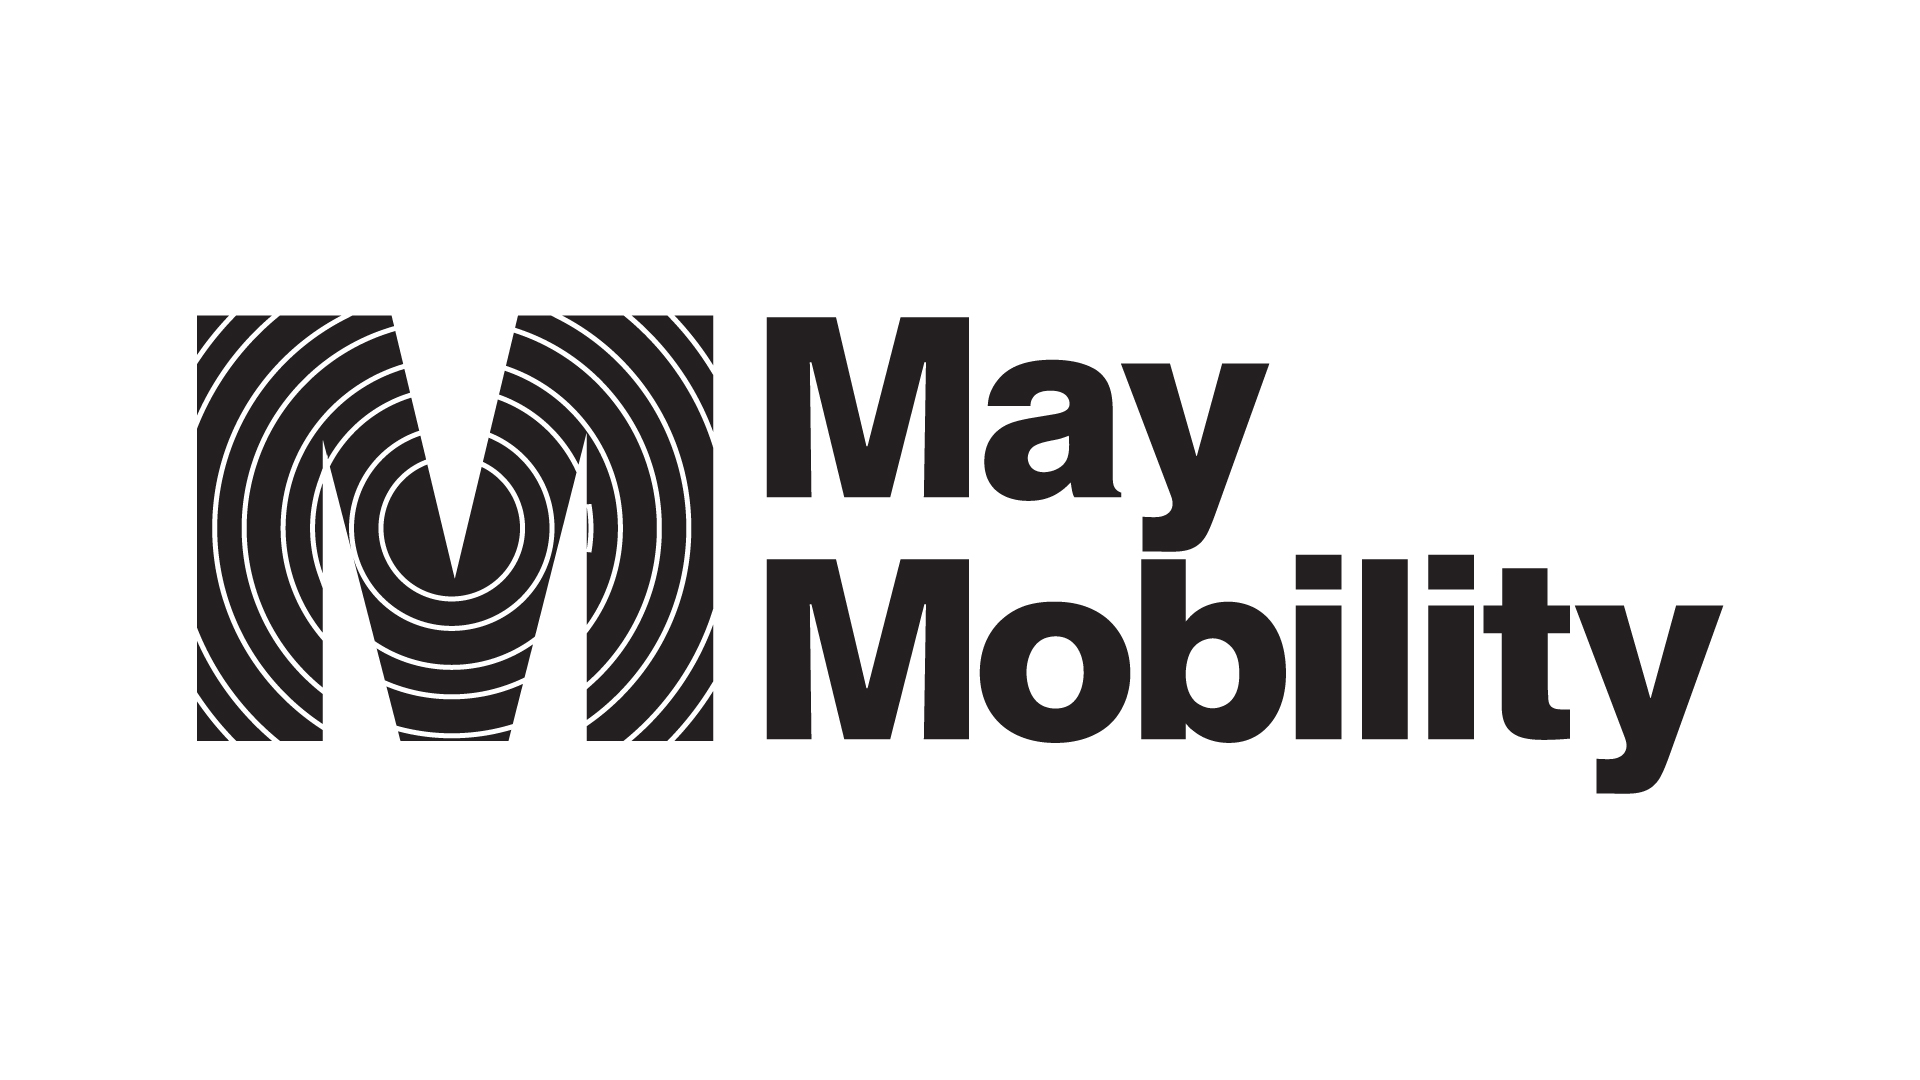 A logo option for May Mobility